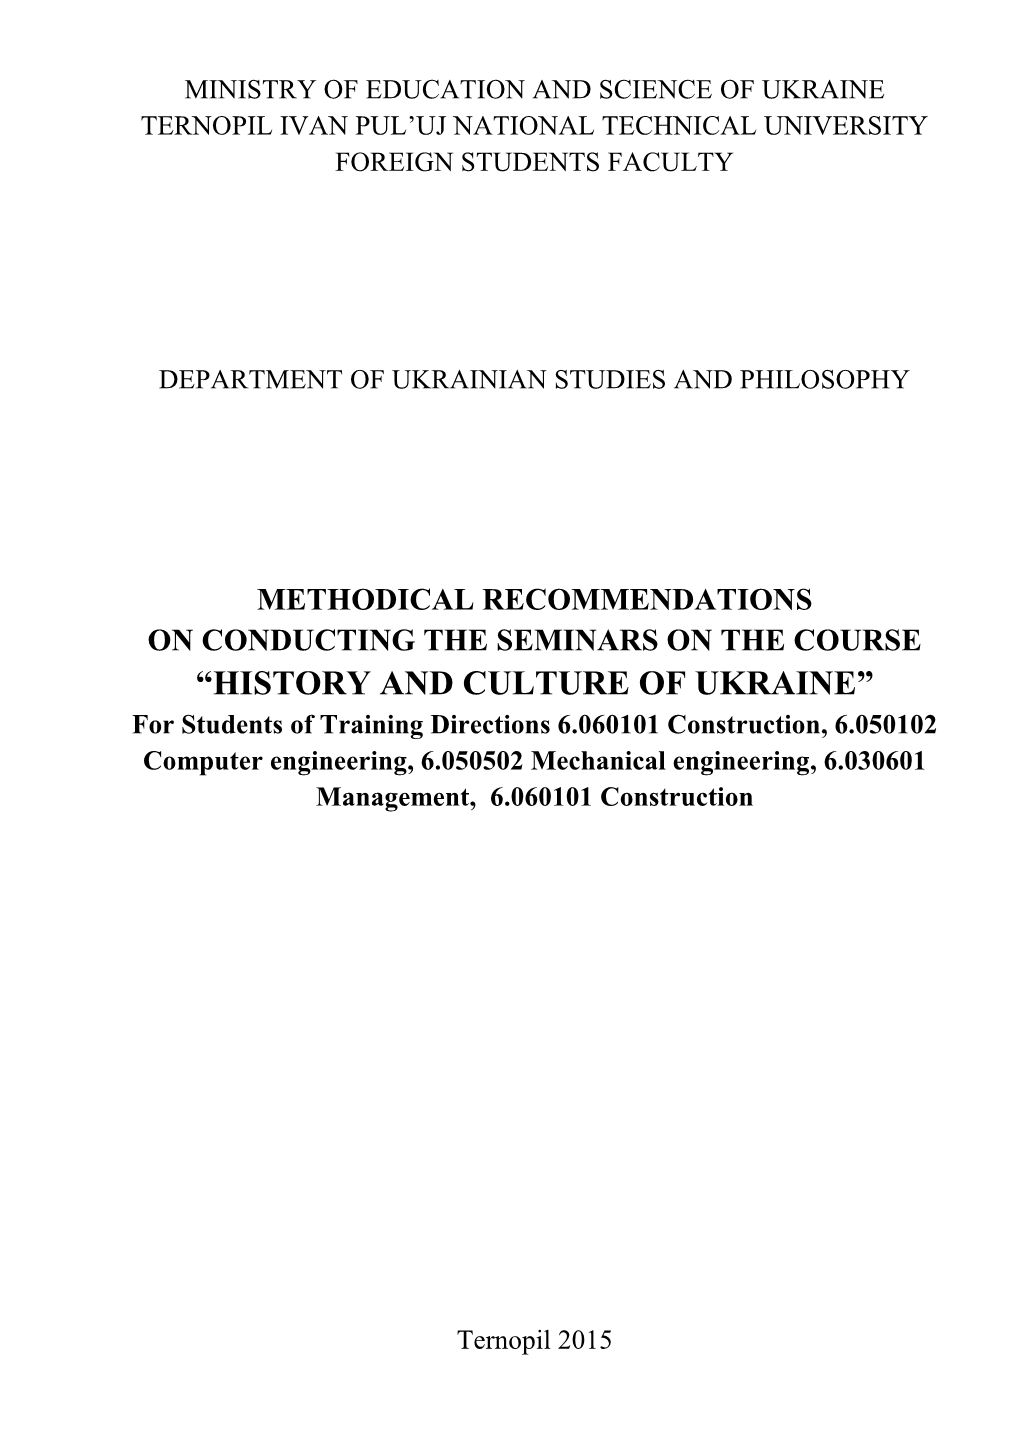 “History and Culture of Ukraine”